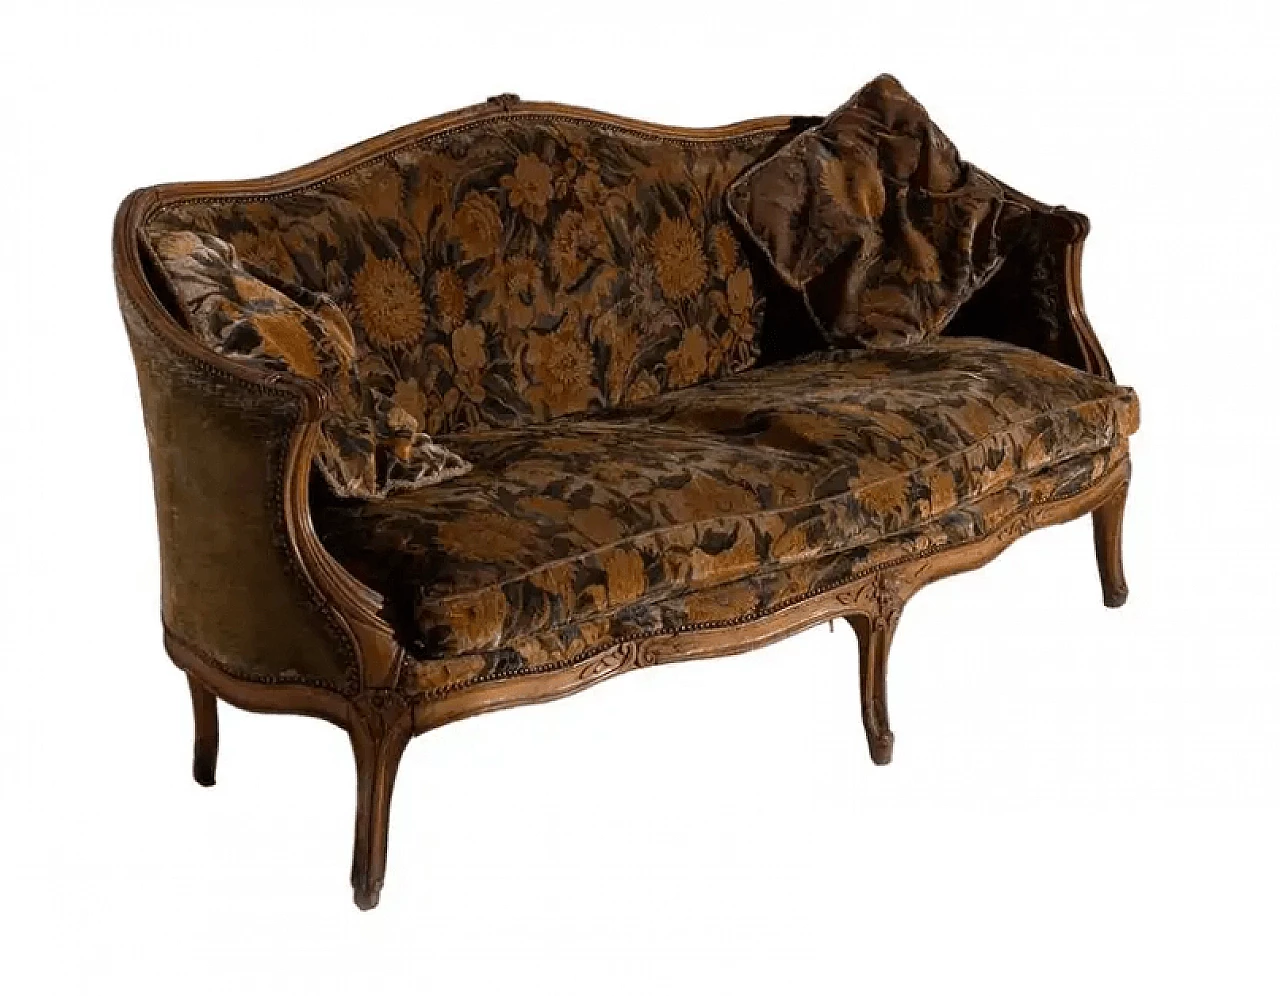 Majestic sofa with floral fabric, early 20th century 1